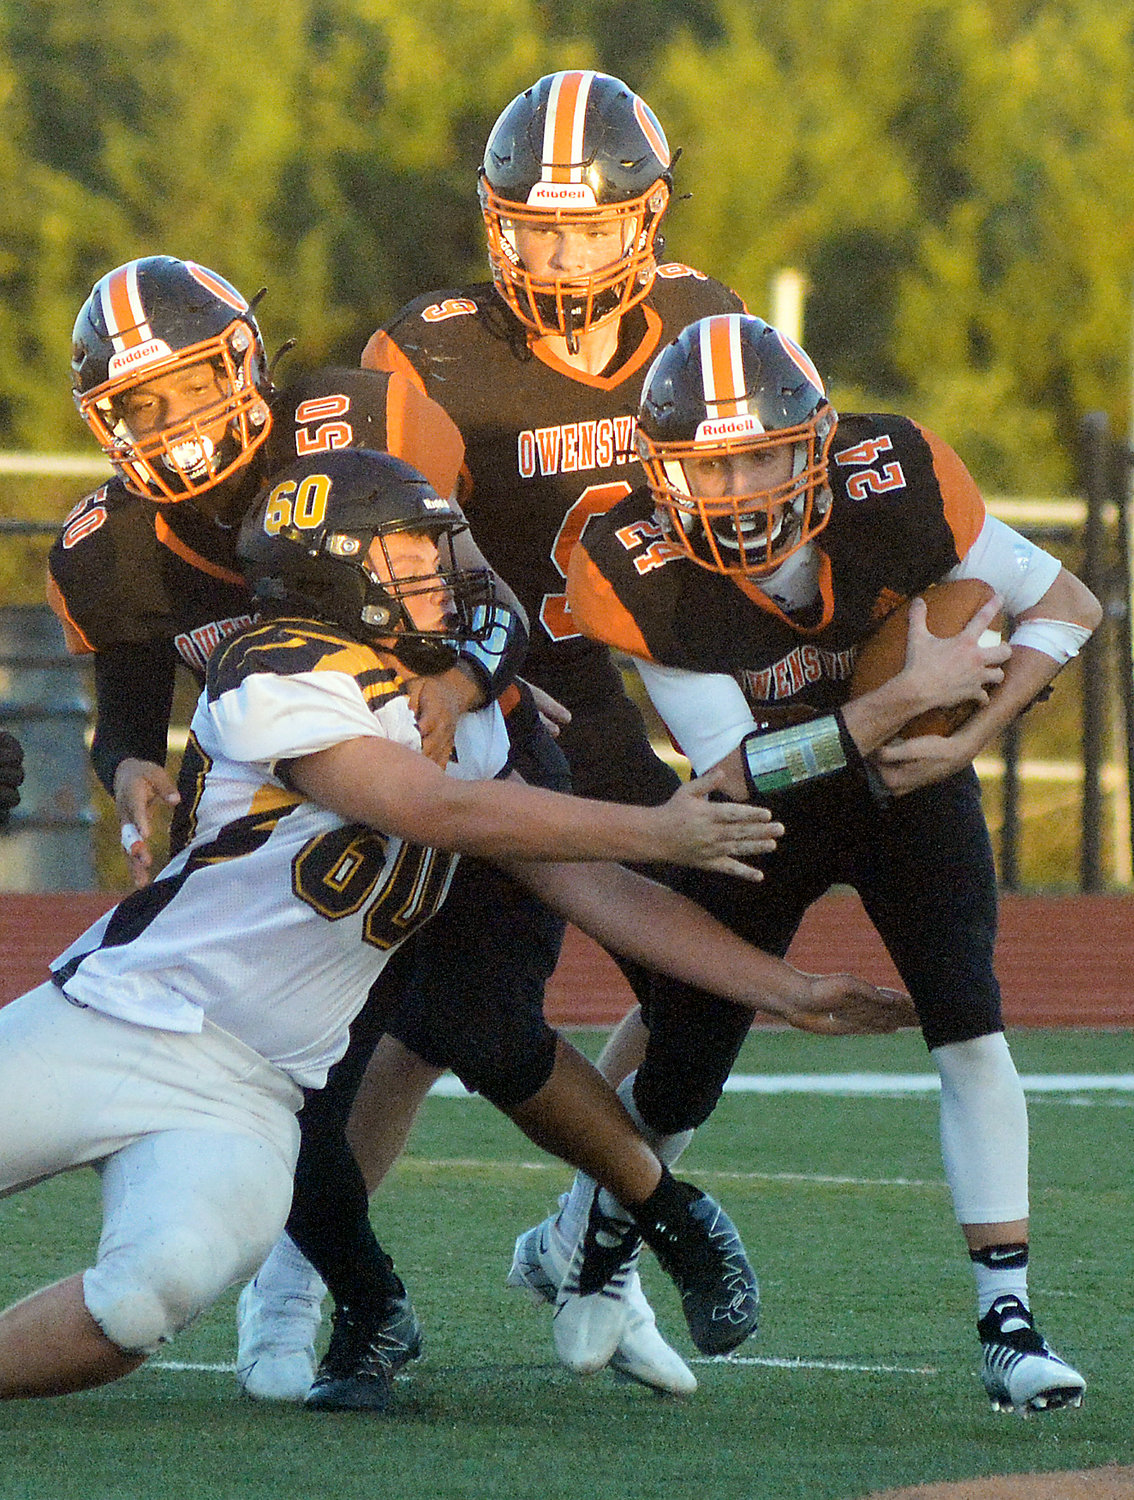 Tanner Meyer (far right) secures the football while looking for open field to run on.